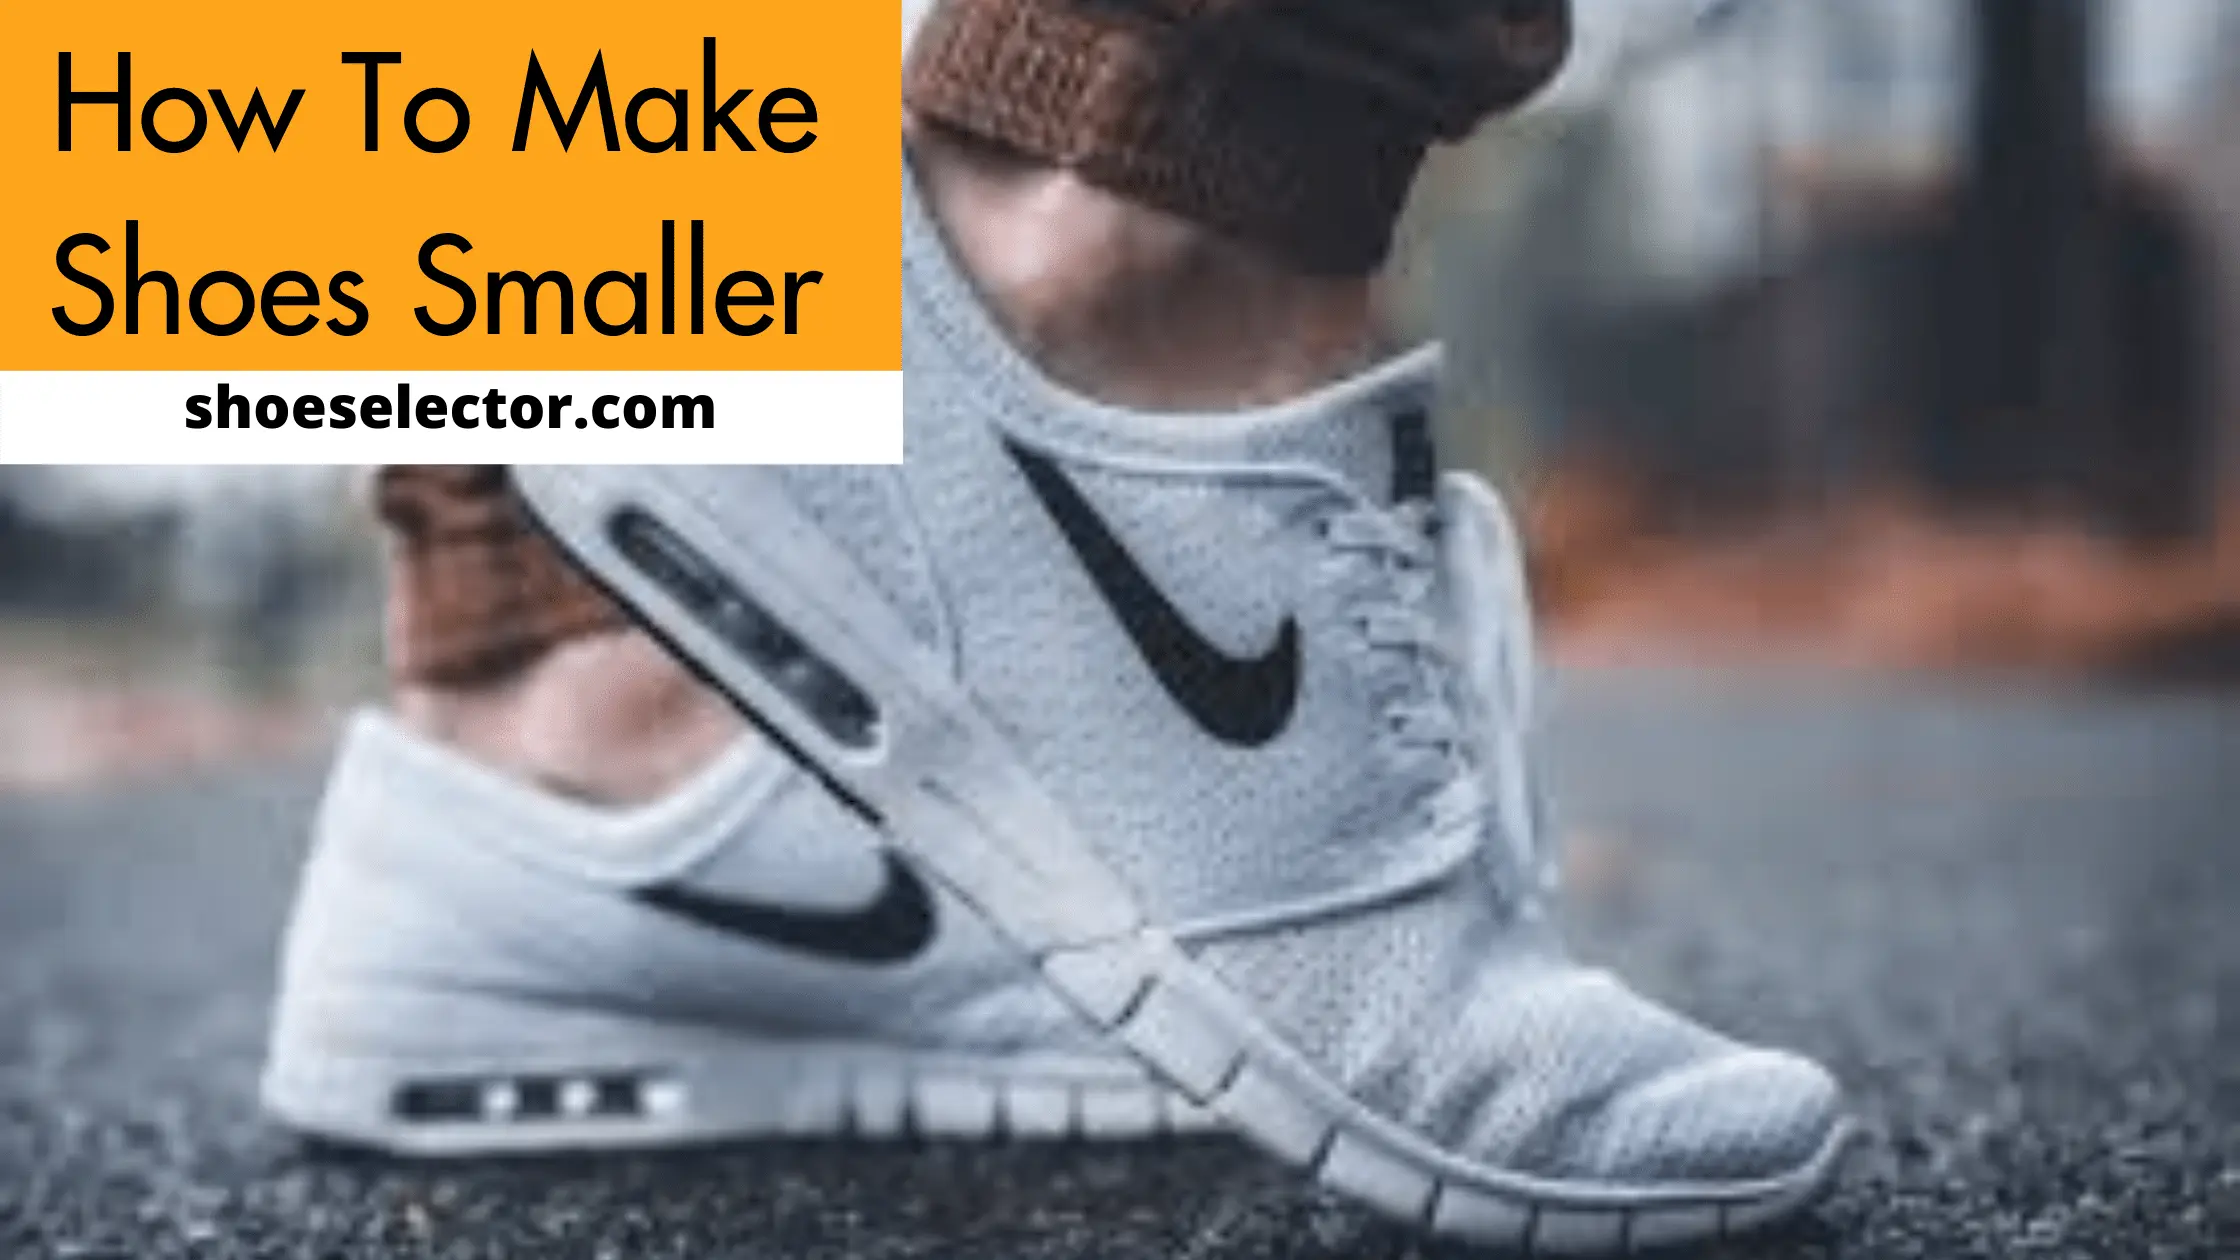 How To Make Shoes Smaller? 7 Easy Steps To Follow